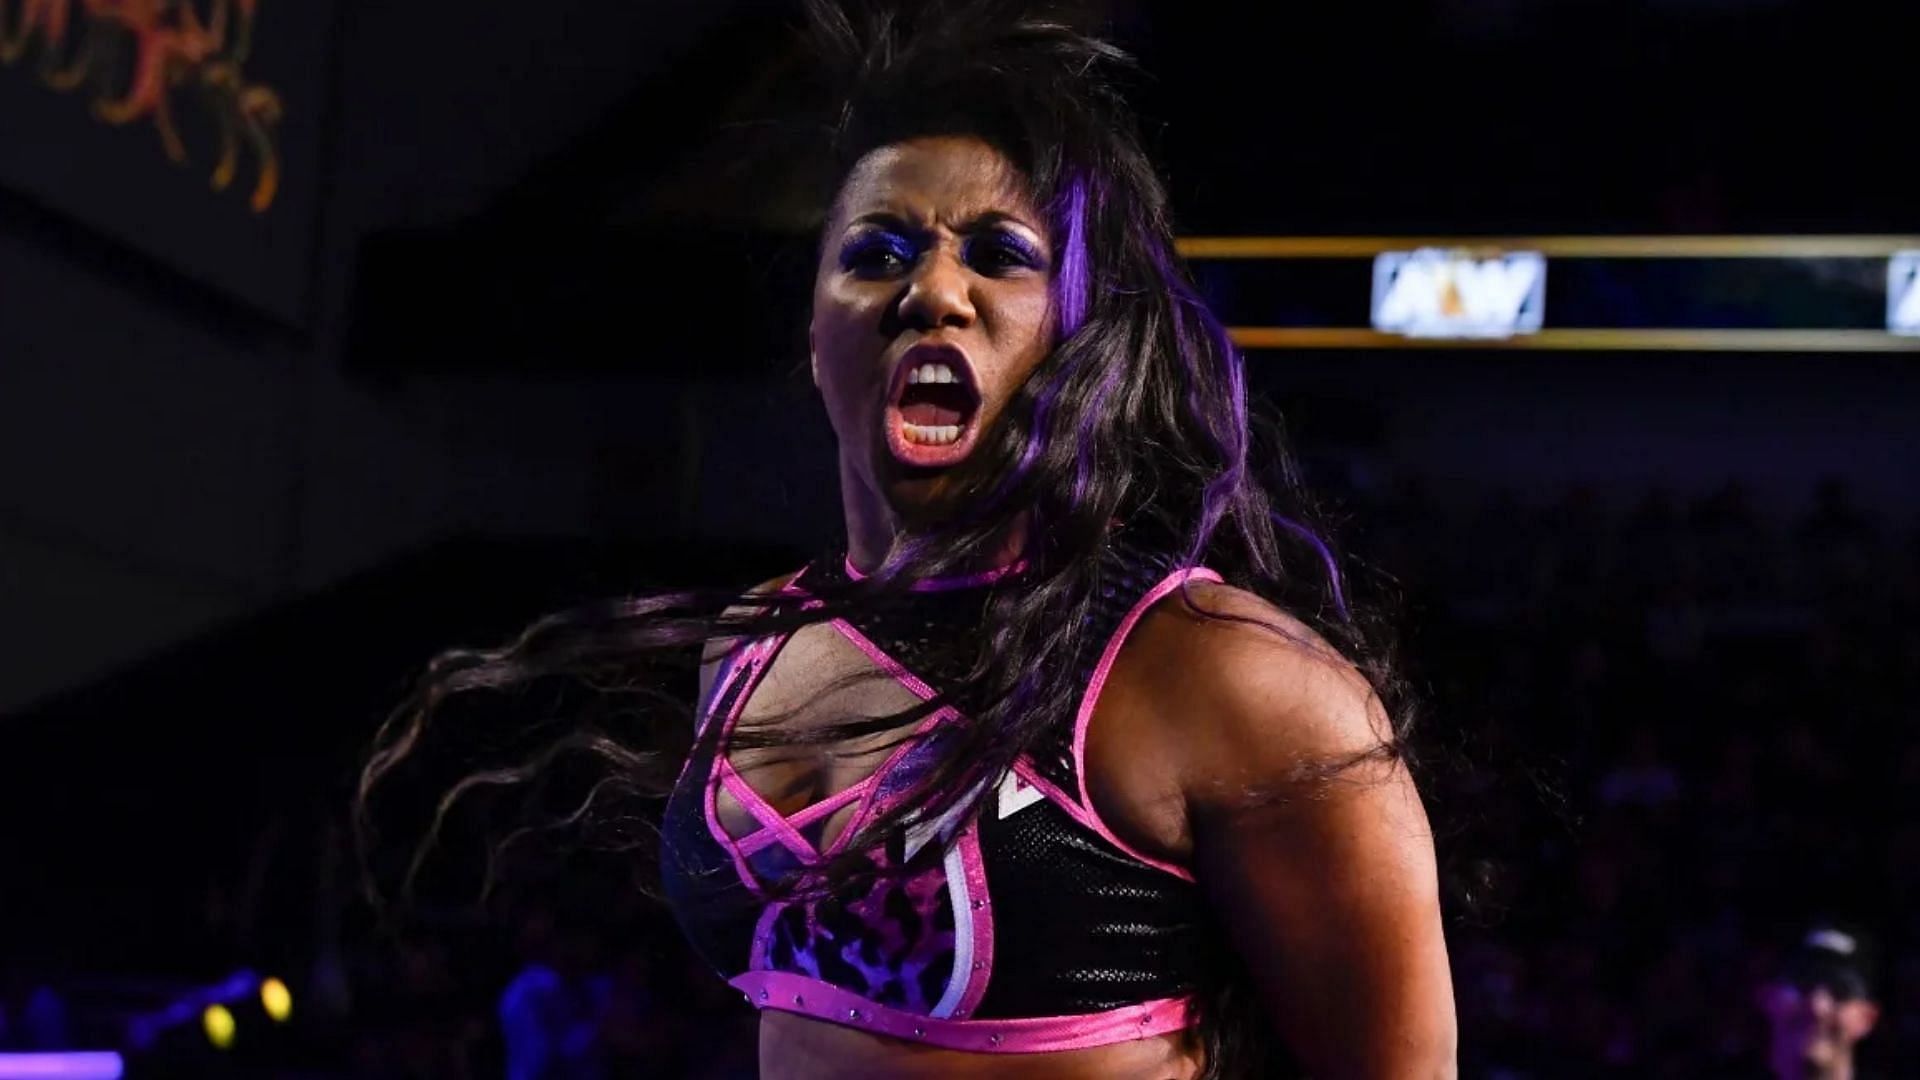 Athena is the longest reigning ROH Women